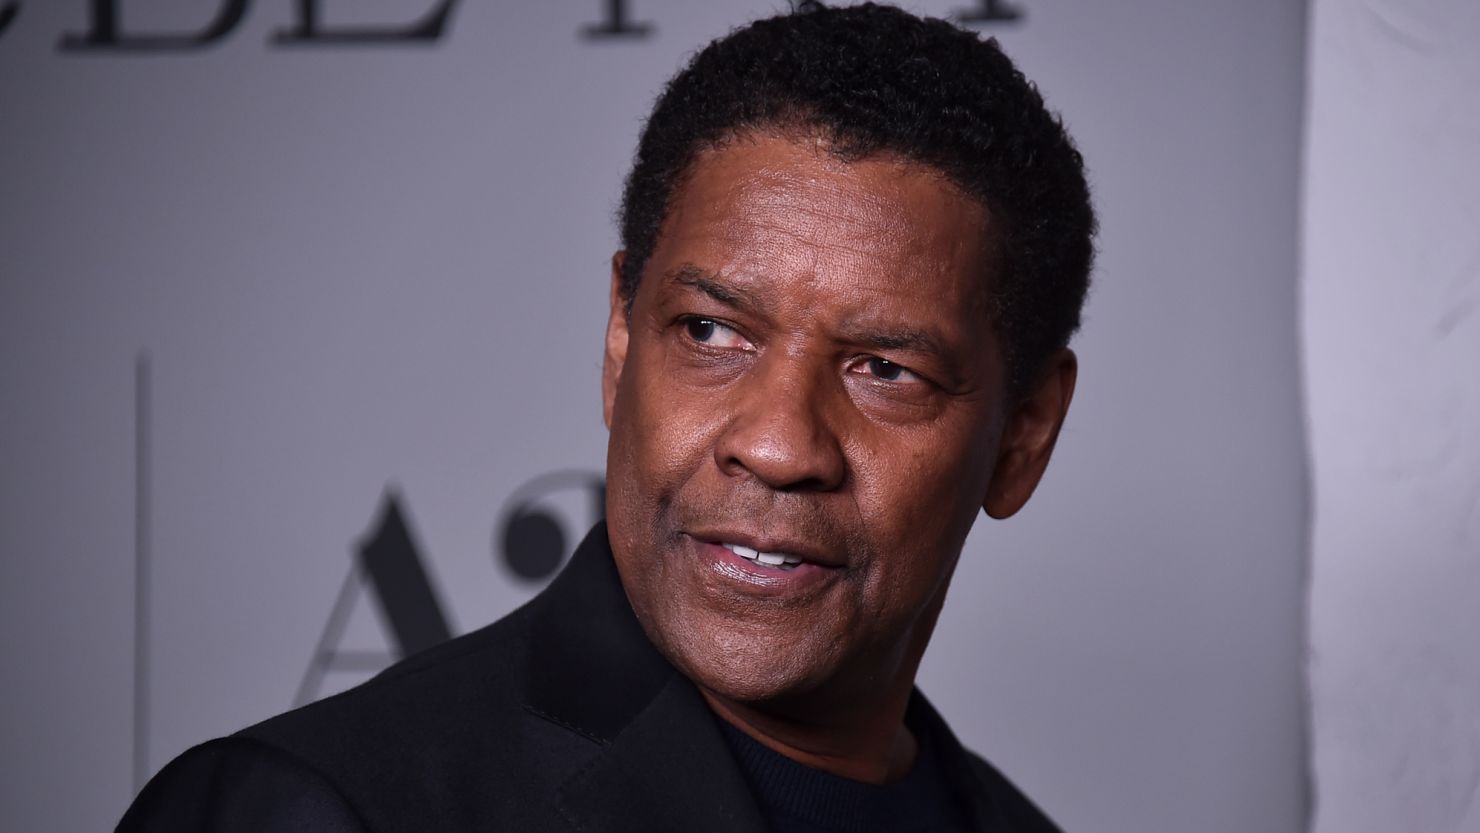 Denzel Washington arrives at the premiere of "The Tragedy of Macbeth" on Thursday, Dec. 18, in Los Angeles. On Tuesday, Washington received his tenth Oscar nomination for his role in the film.